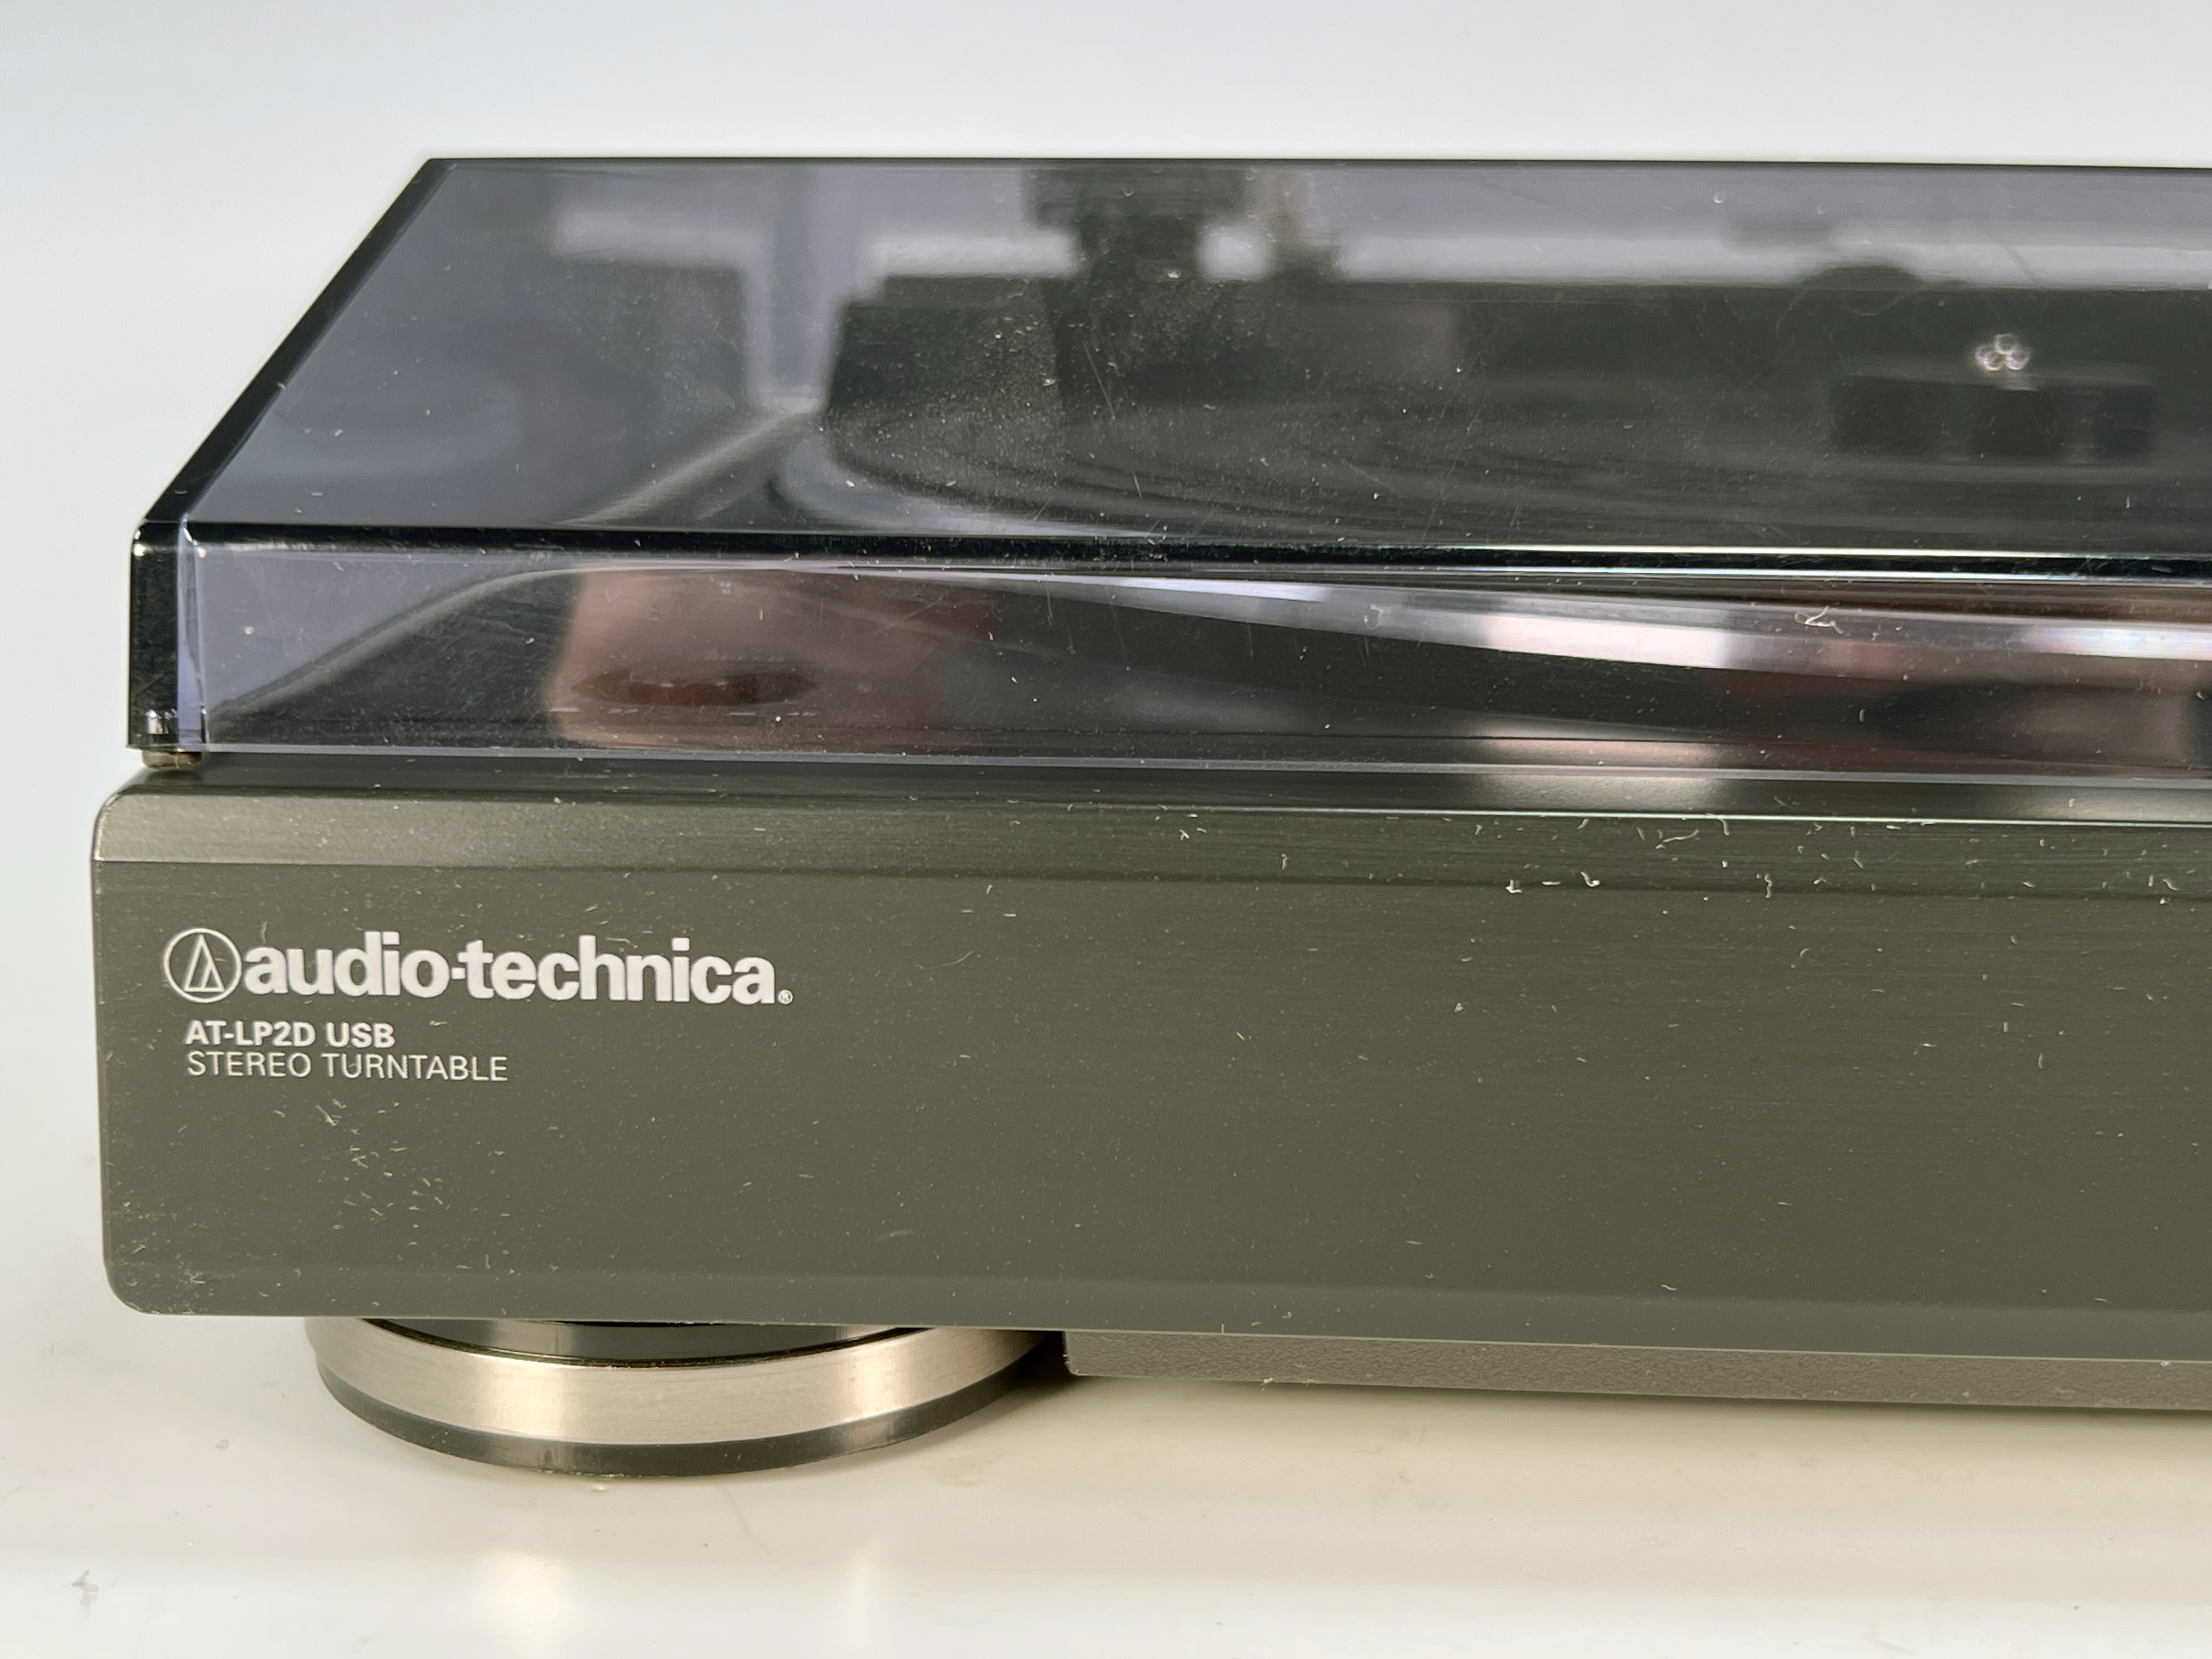 Auto Technica Stereo Turntable Record Player image 2